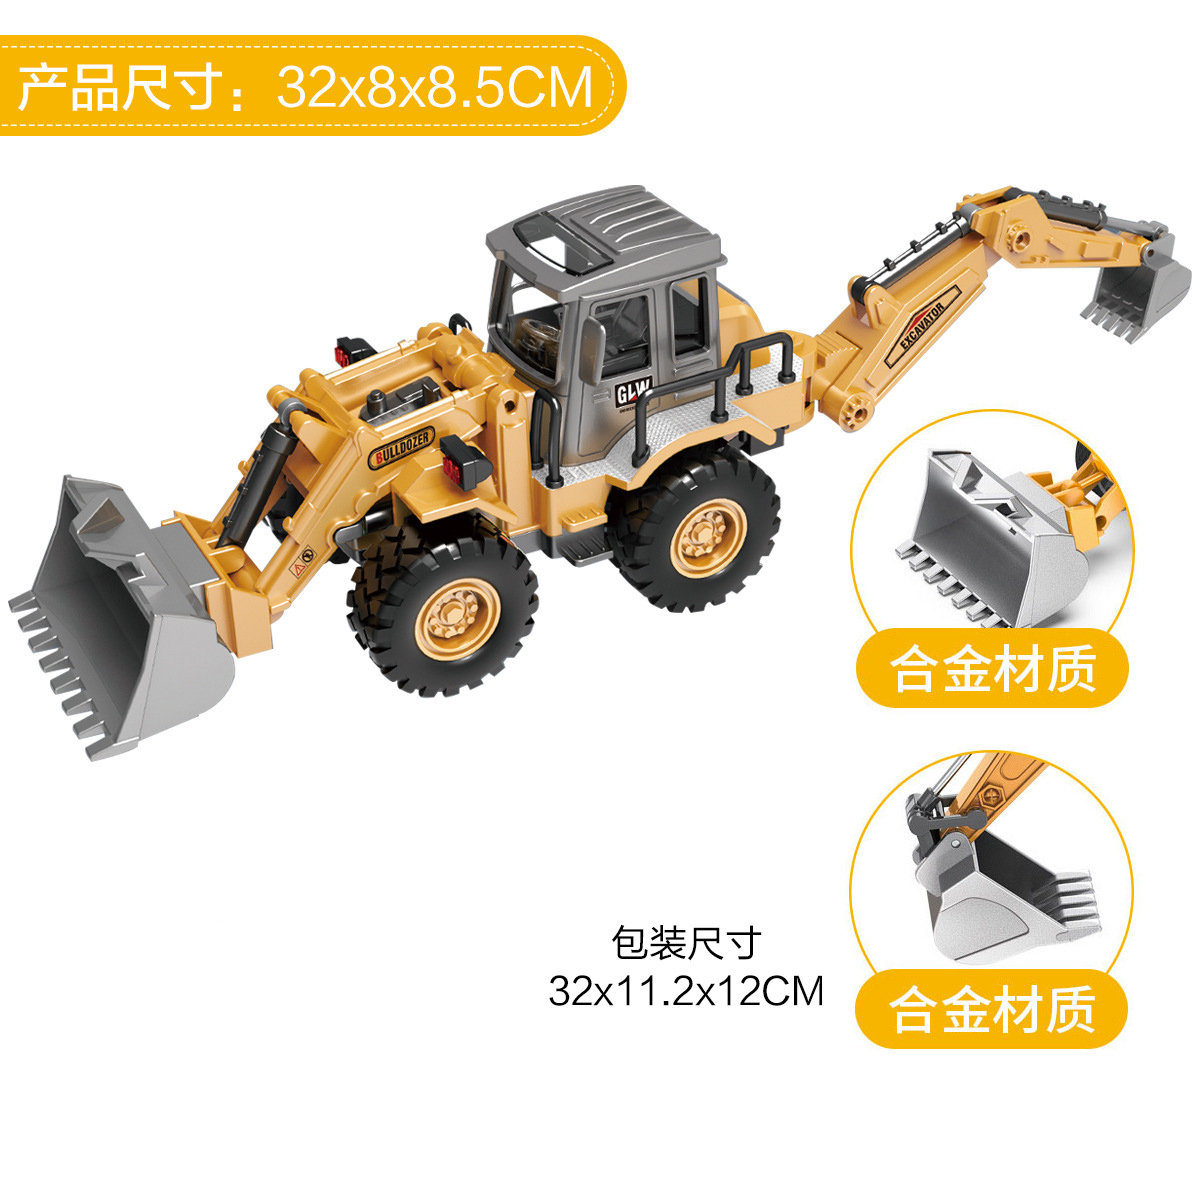 Alloy Engineering Bulldozer Crane Construction Truck Tower Designer for Boys Play Excavator Vehicles Cars Set Toy for Kids alx